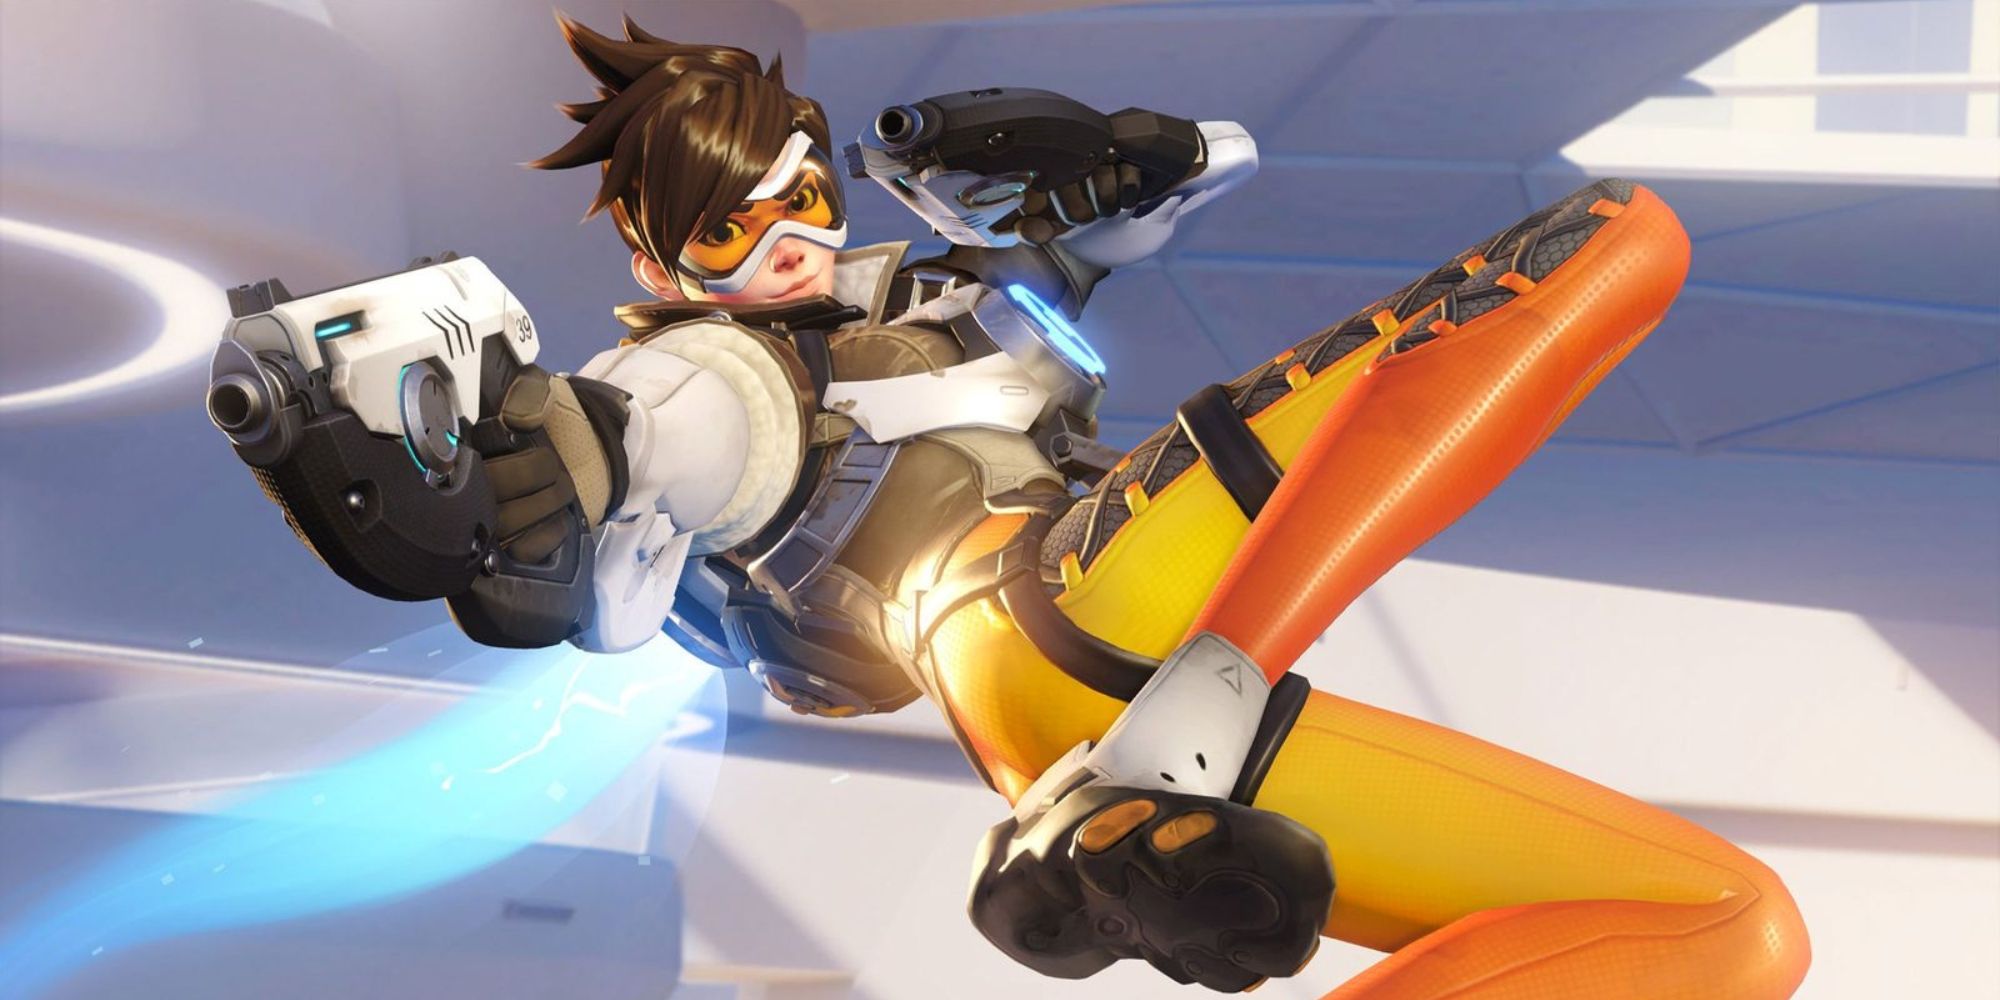 Tracer in Overwatch